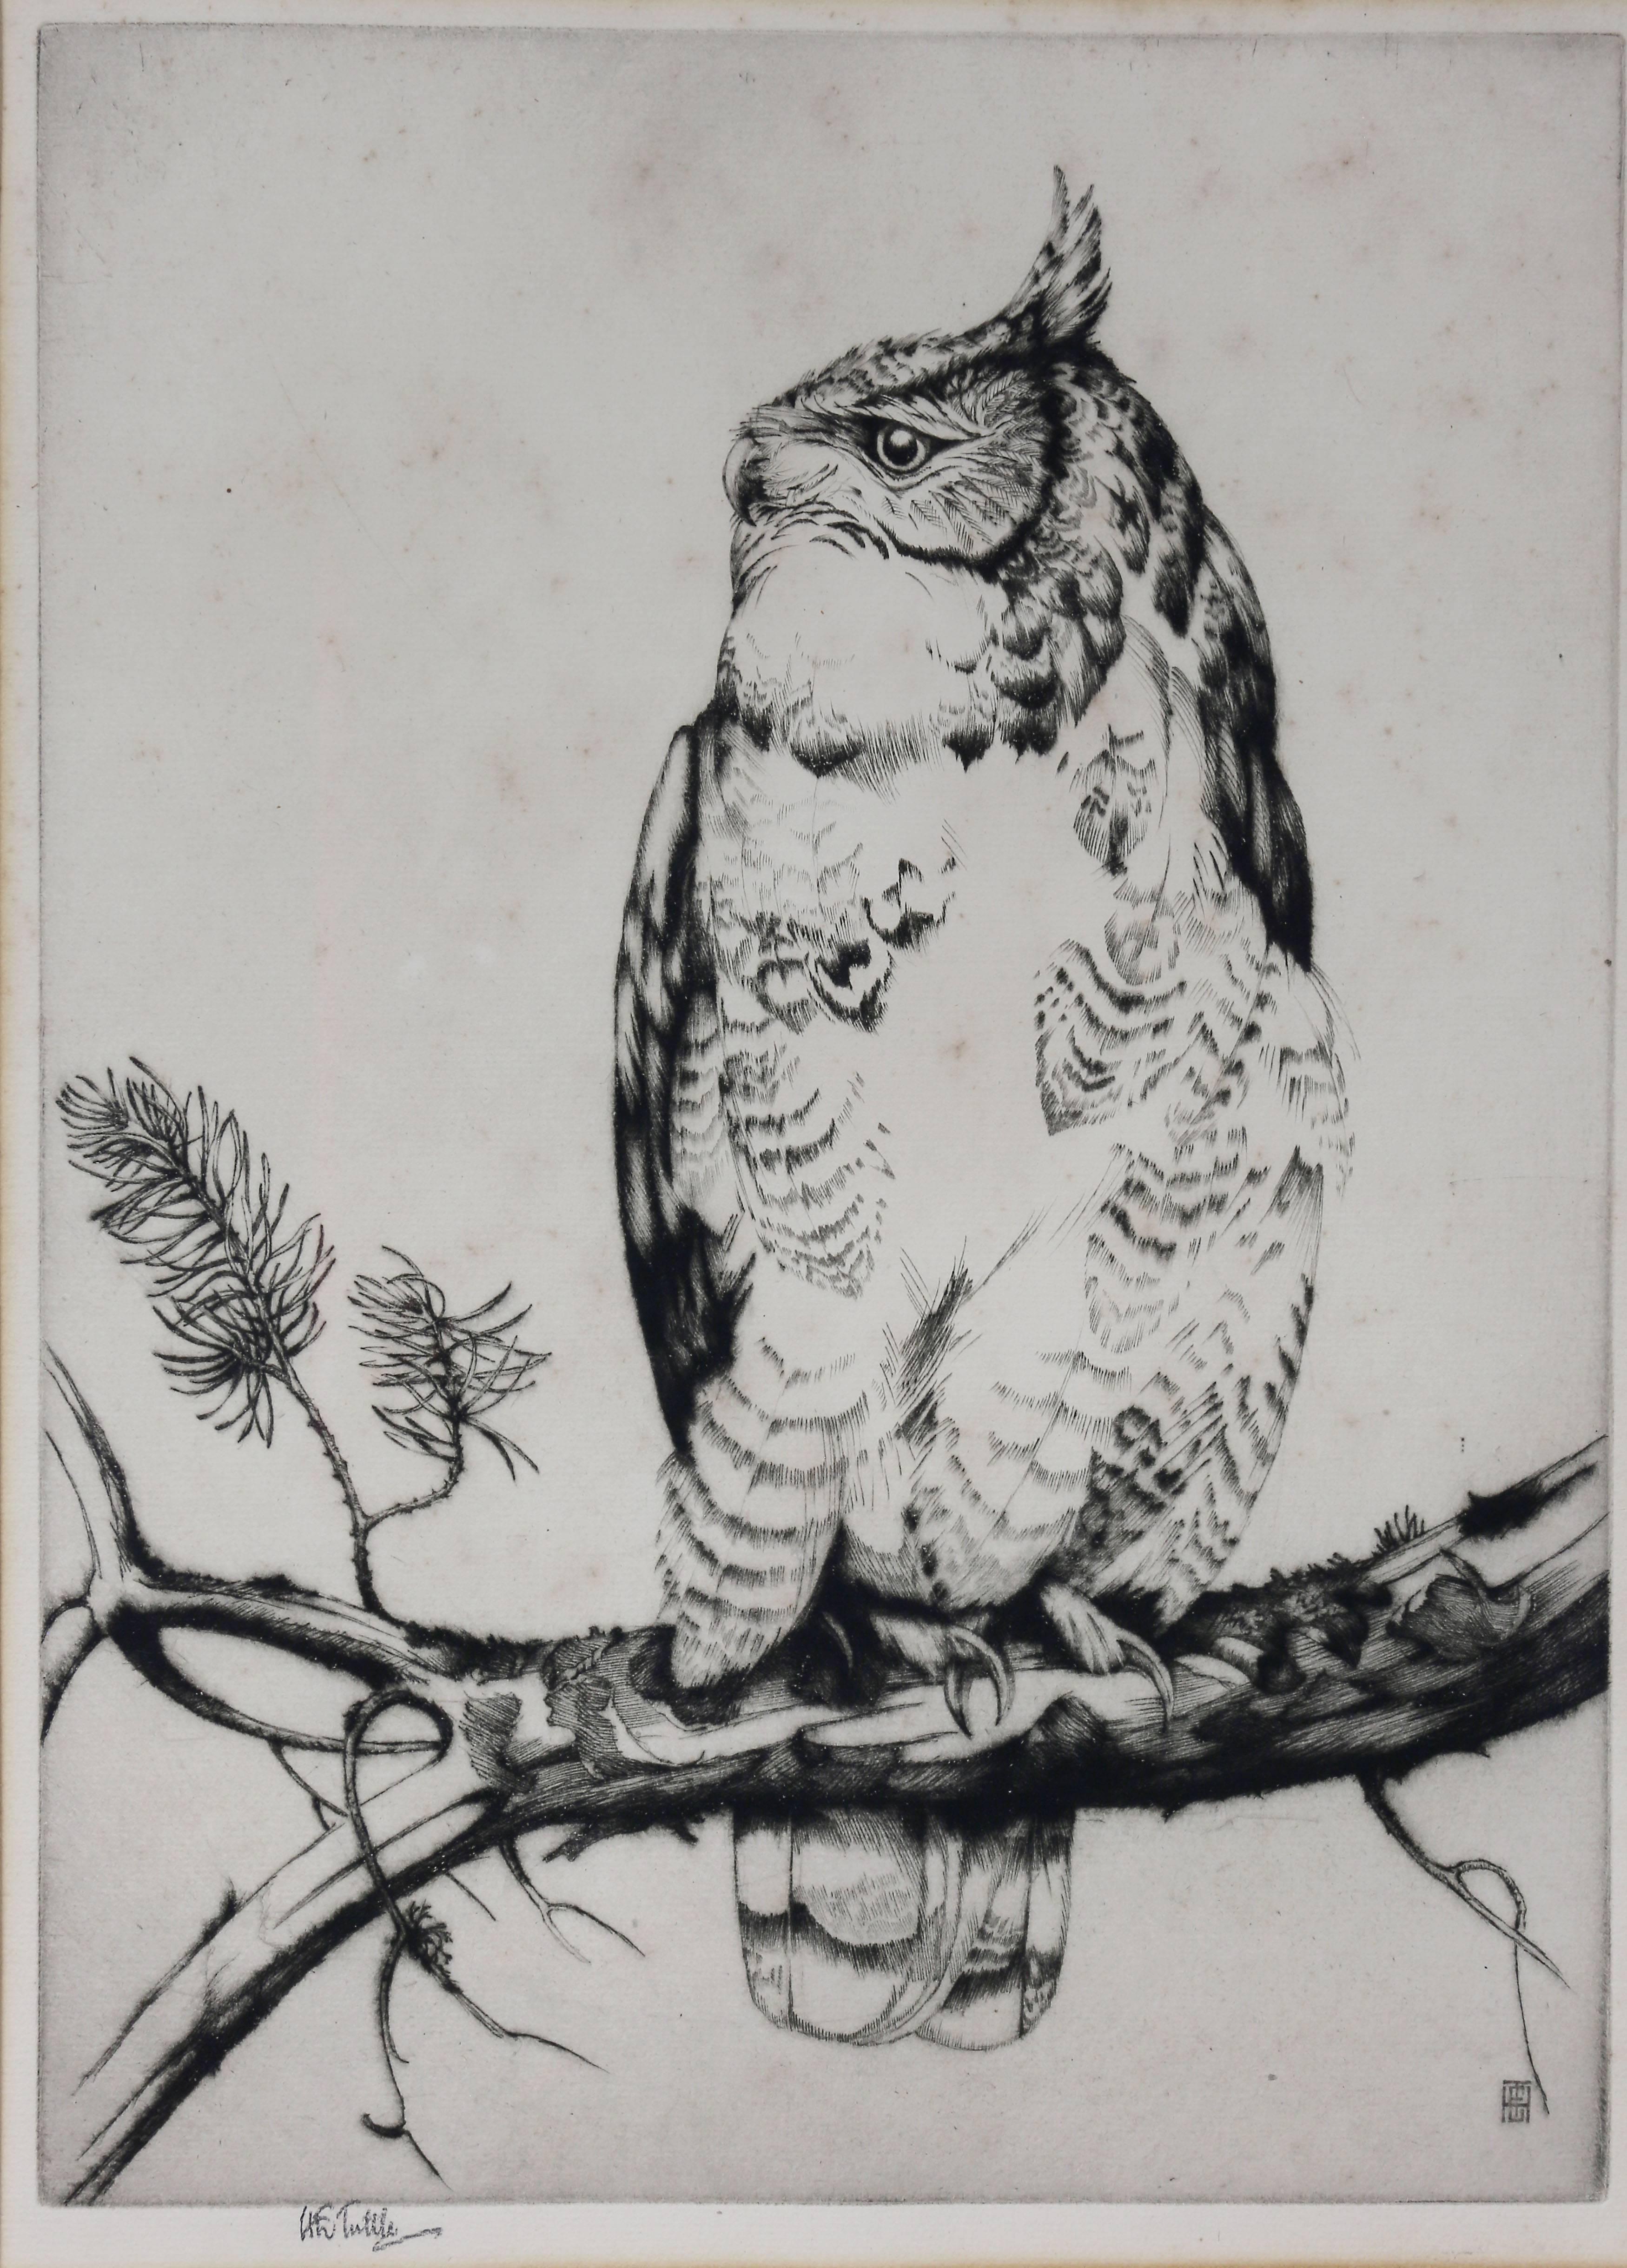 Depicting an owl standing on a branch. Signed lower left in pencil.